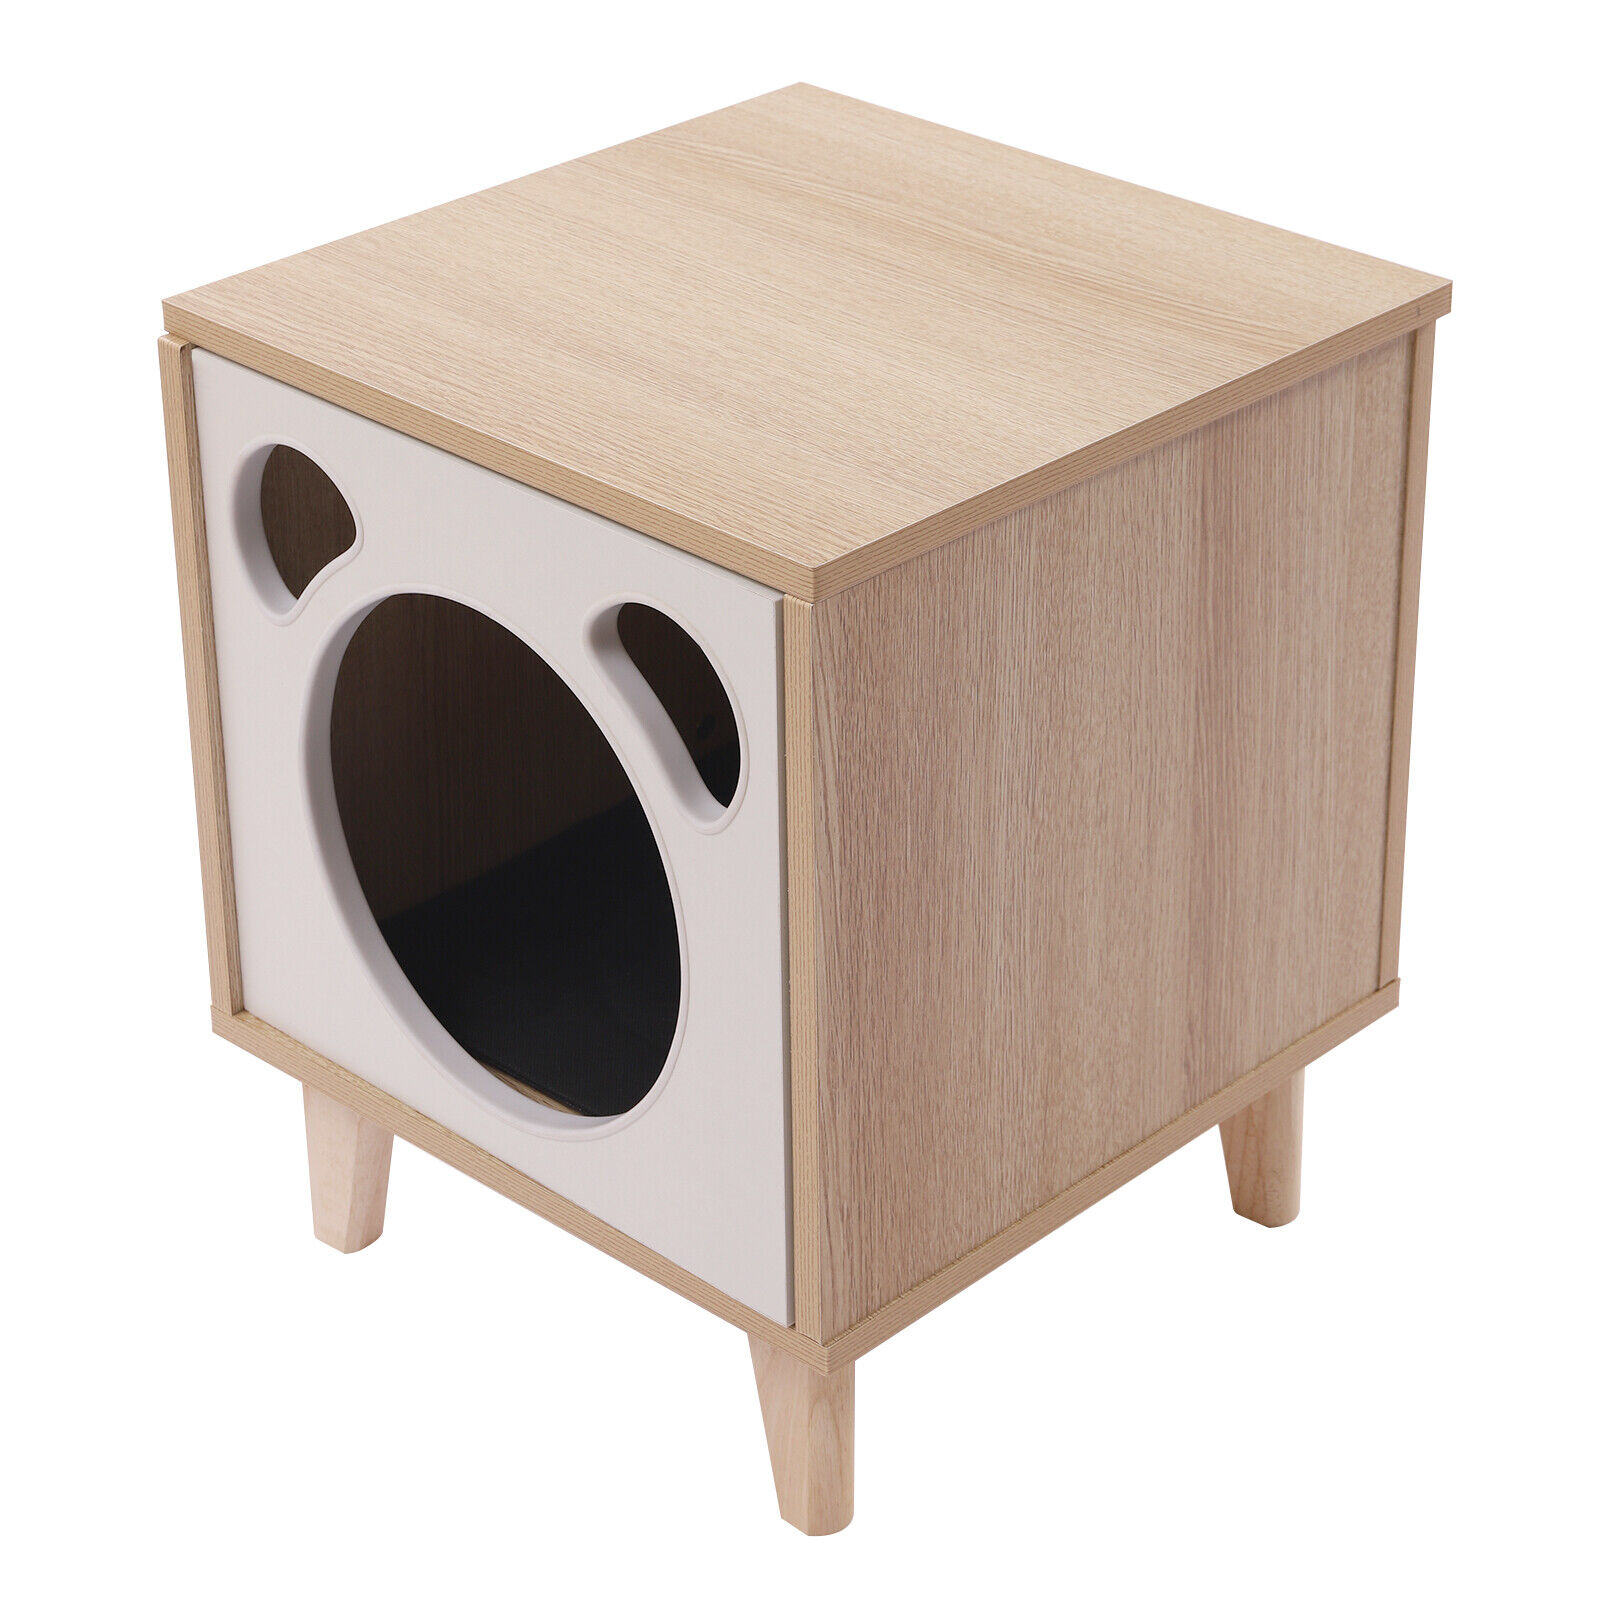 Wooden Nightstand Cat Bed Storage End Table Enclosure Bedside Organizer Modern Unbranded Does not apply - фотография #4